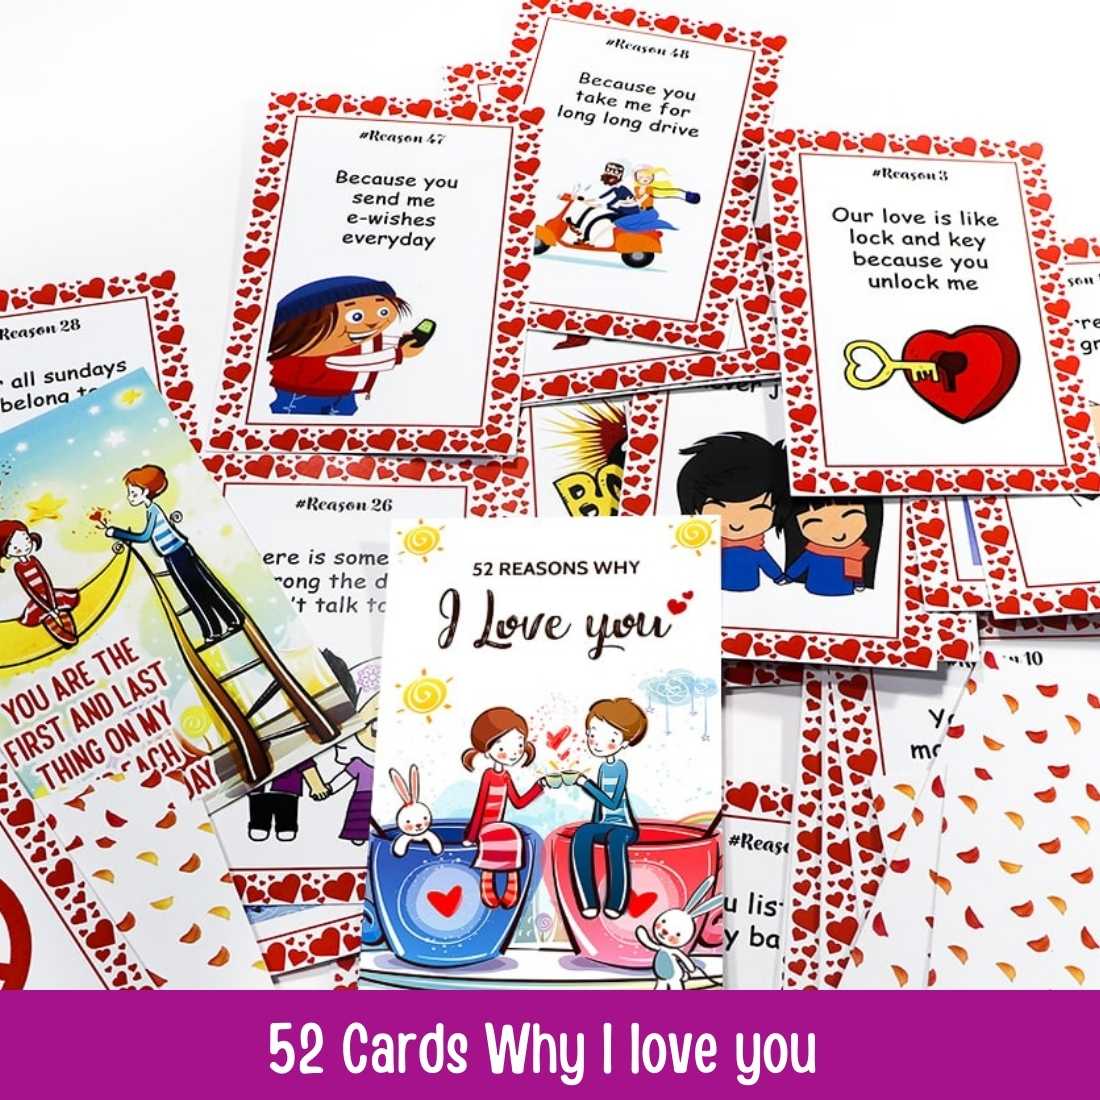 52 Cards Why I love you